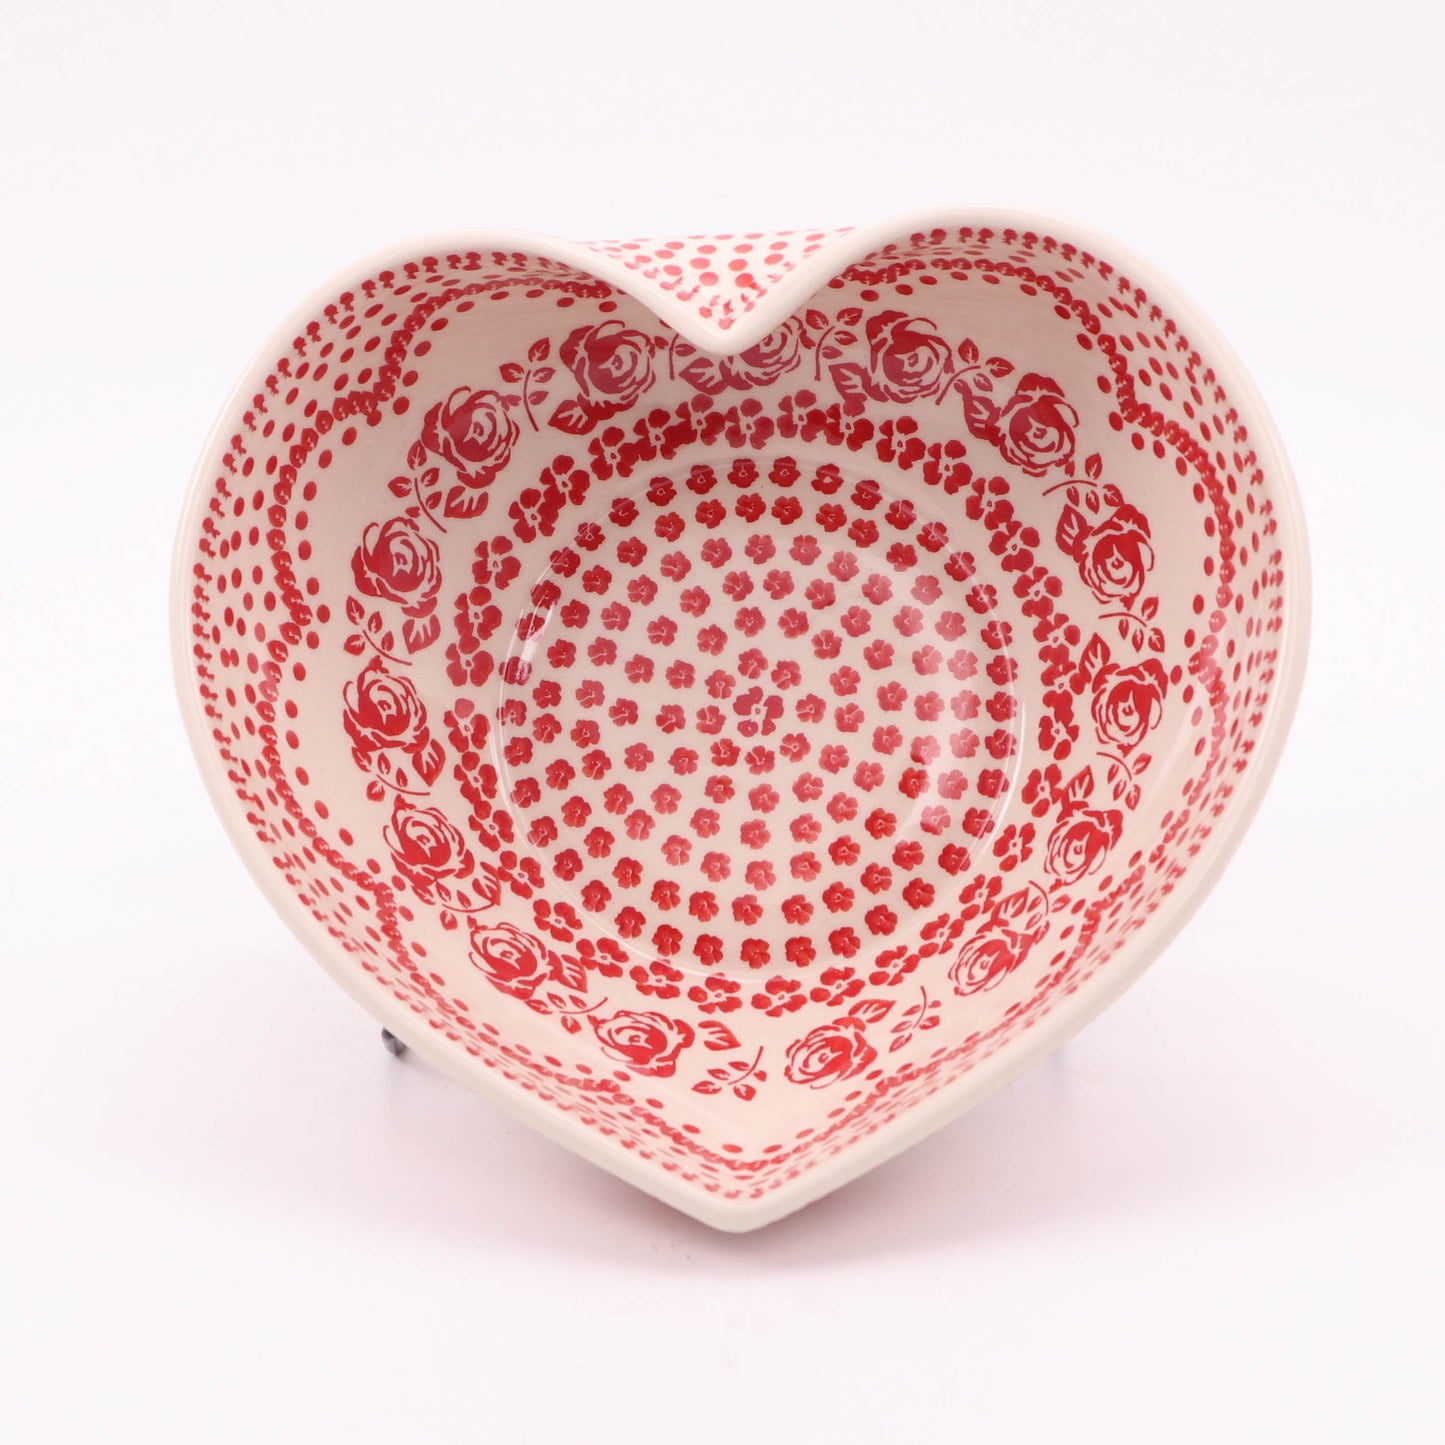 8"x8.5" Heart Bowl. Pattern: Country Rose